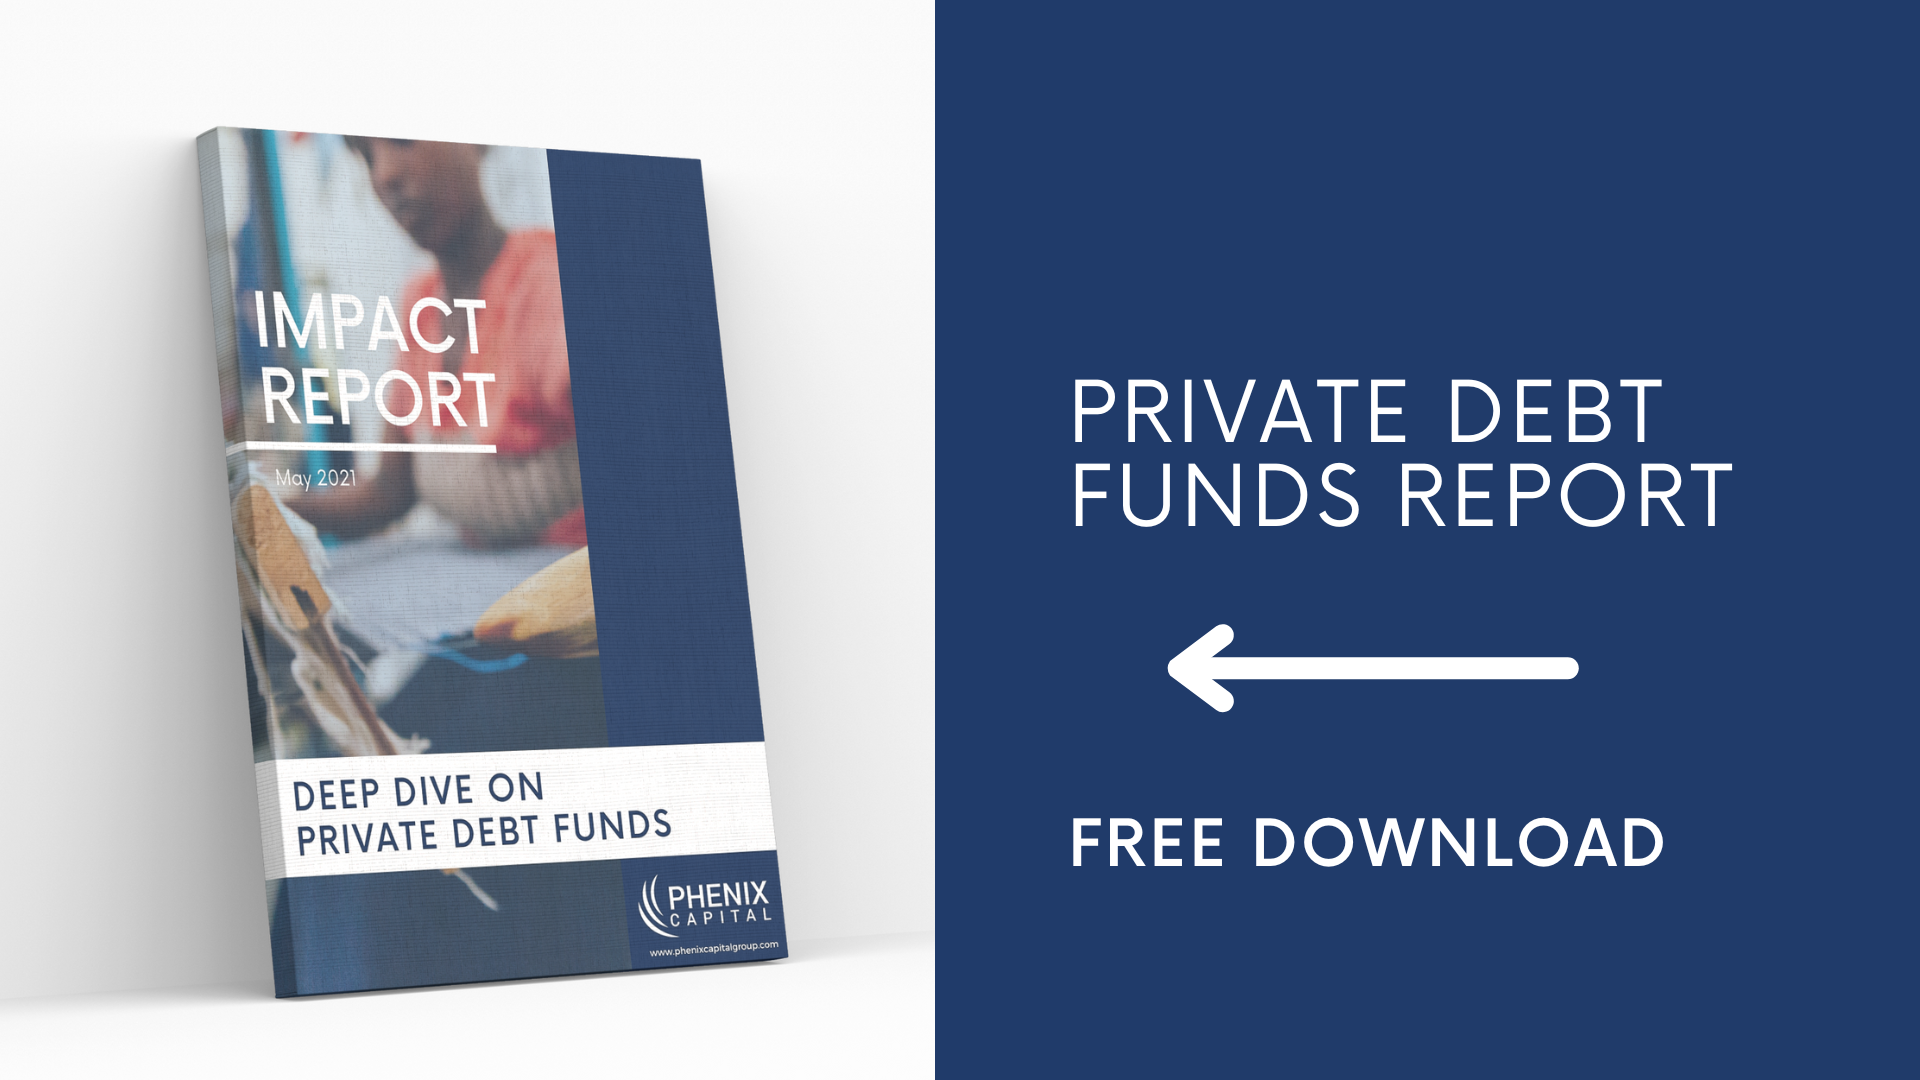 PRESS RELEASE: Impact Report: Deep Dive on Emerging Market Funds